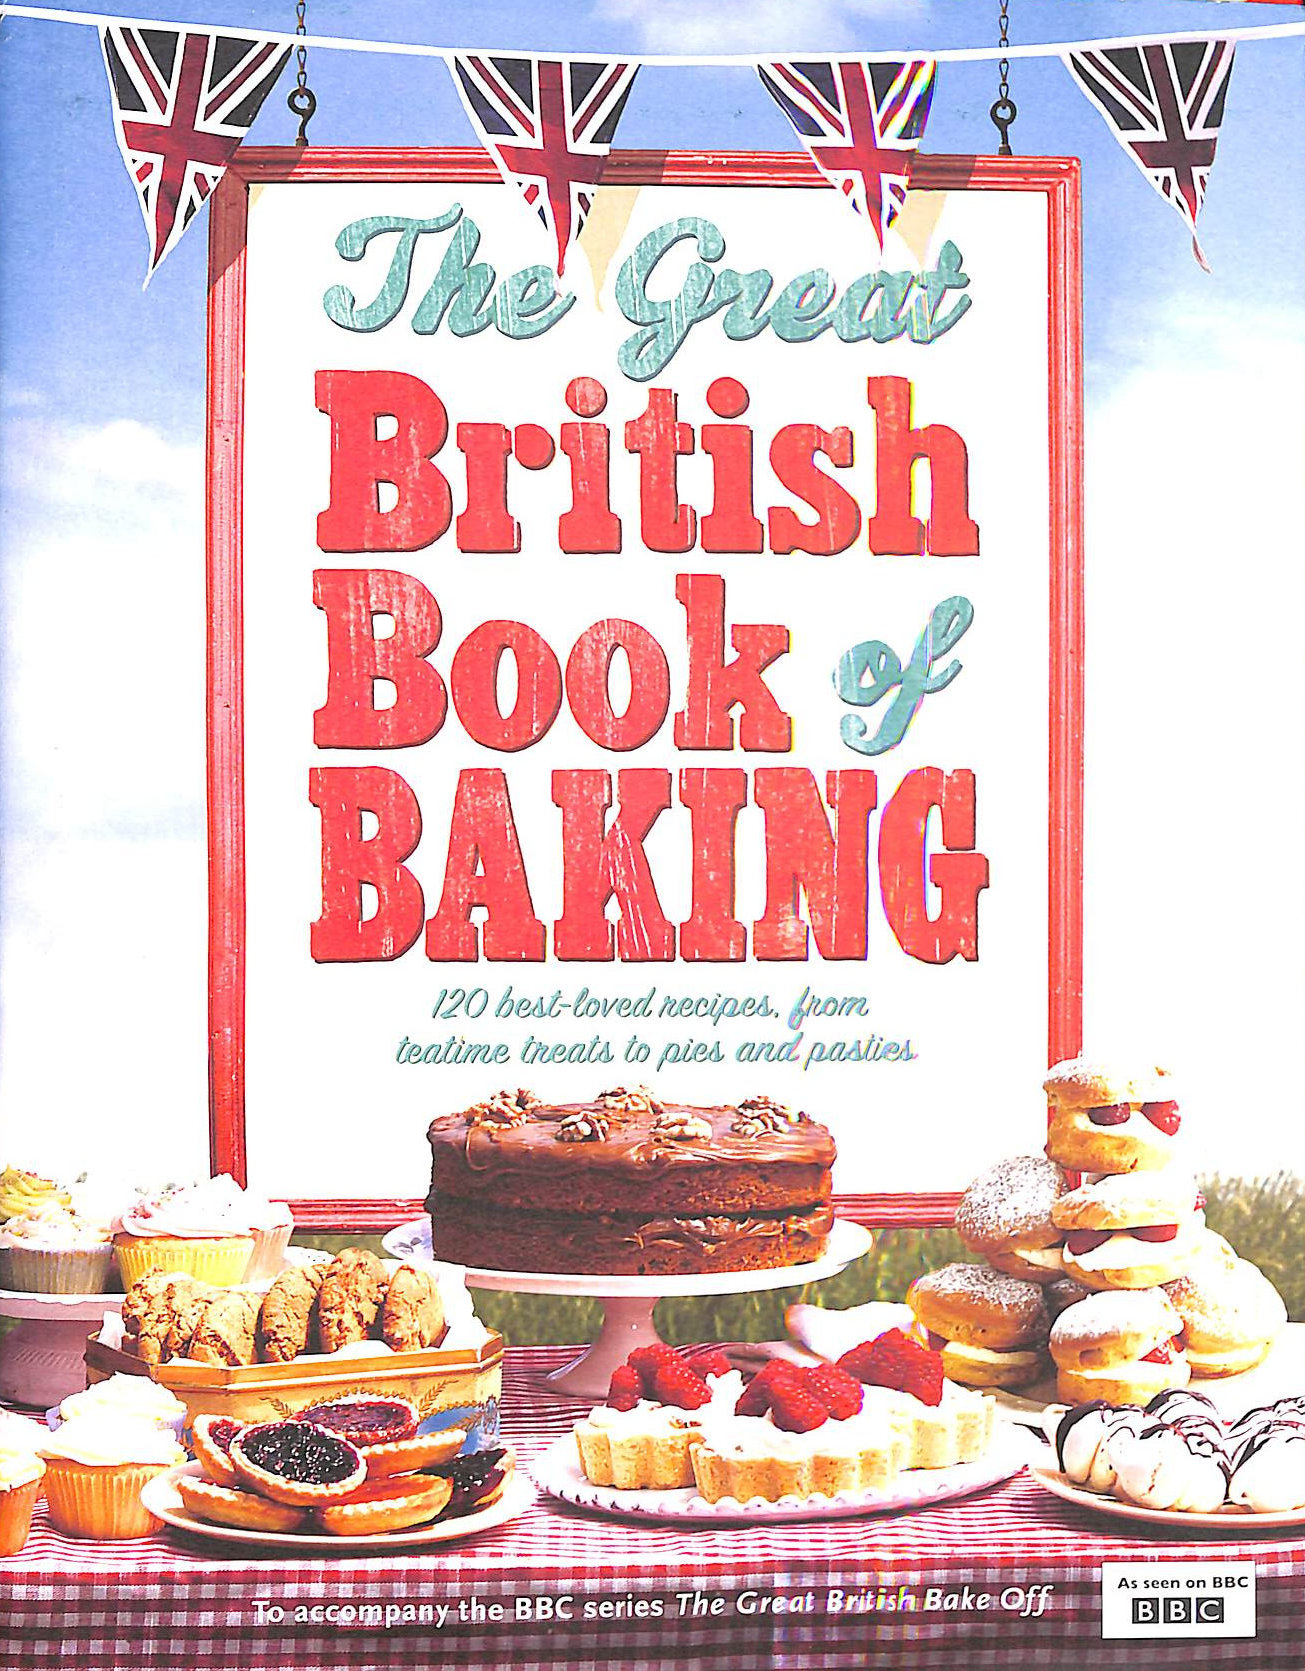 LINDA COLLISTER - The Great British Book of Baking: 120 best-loved recipes from teatime treats to pies and pasties